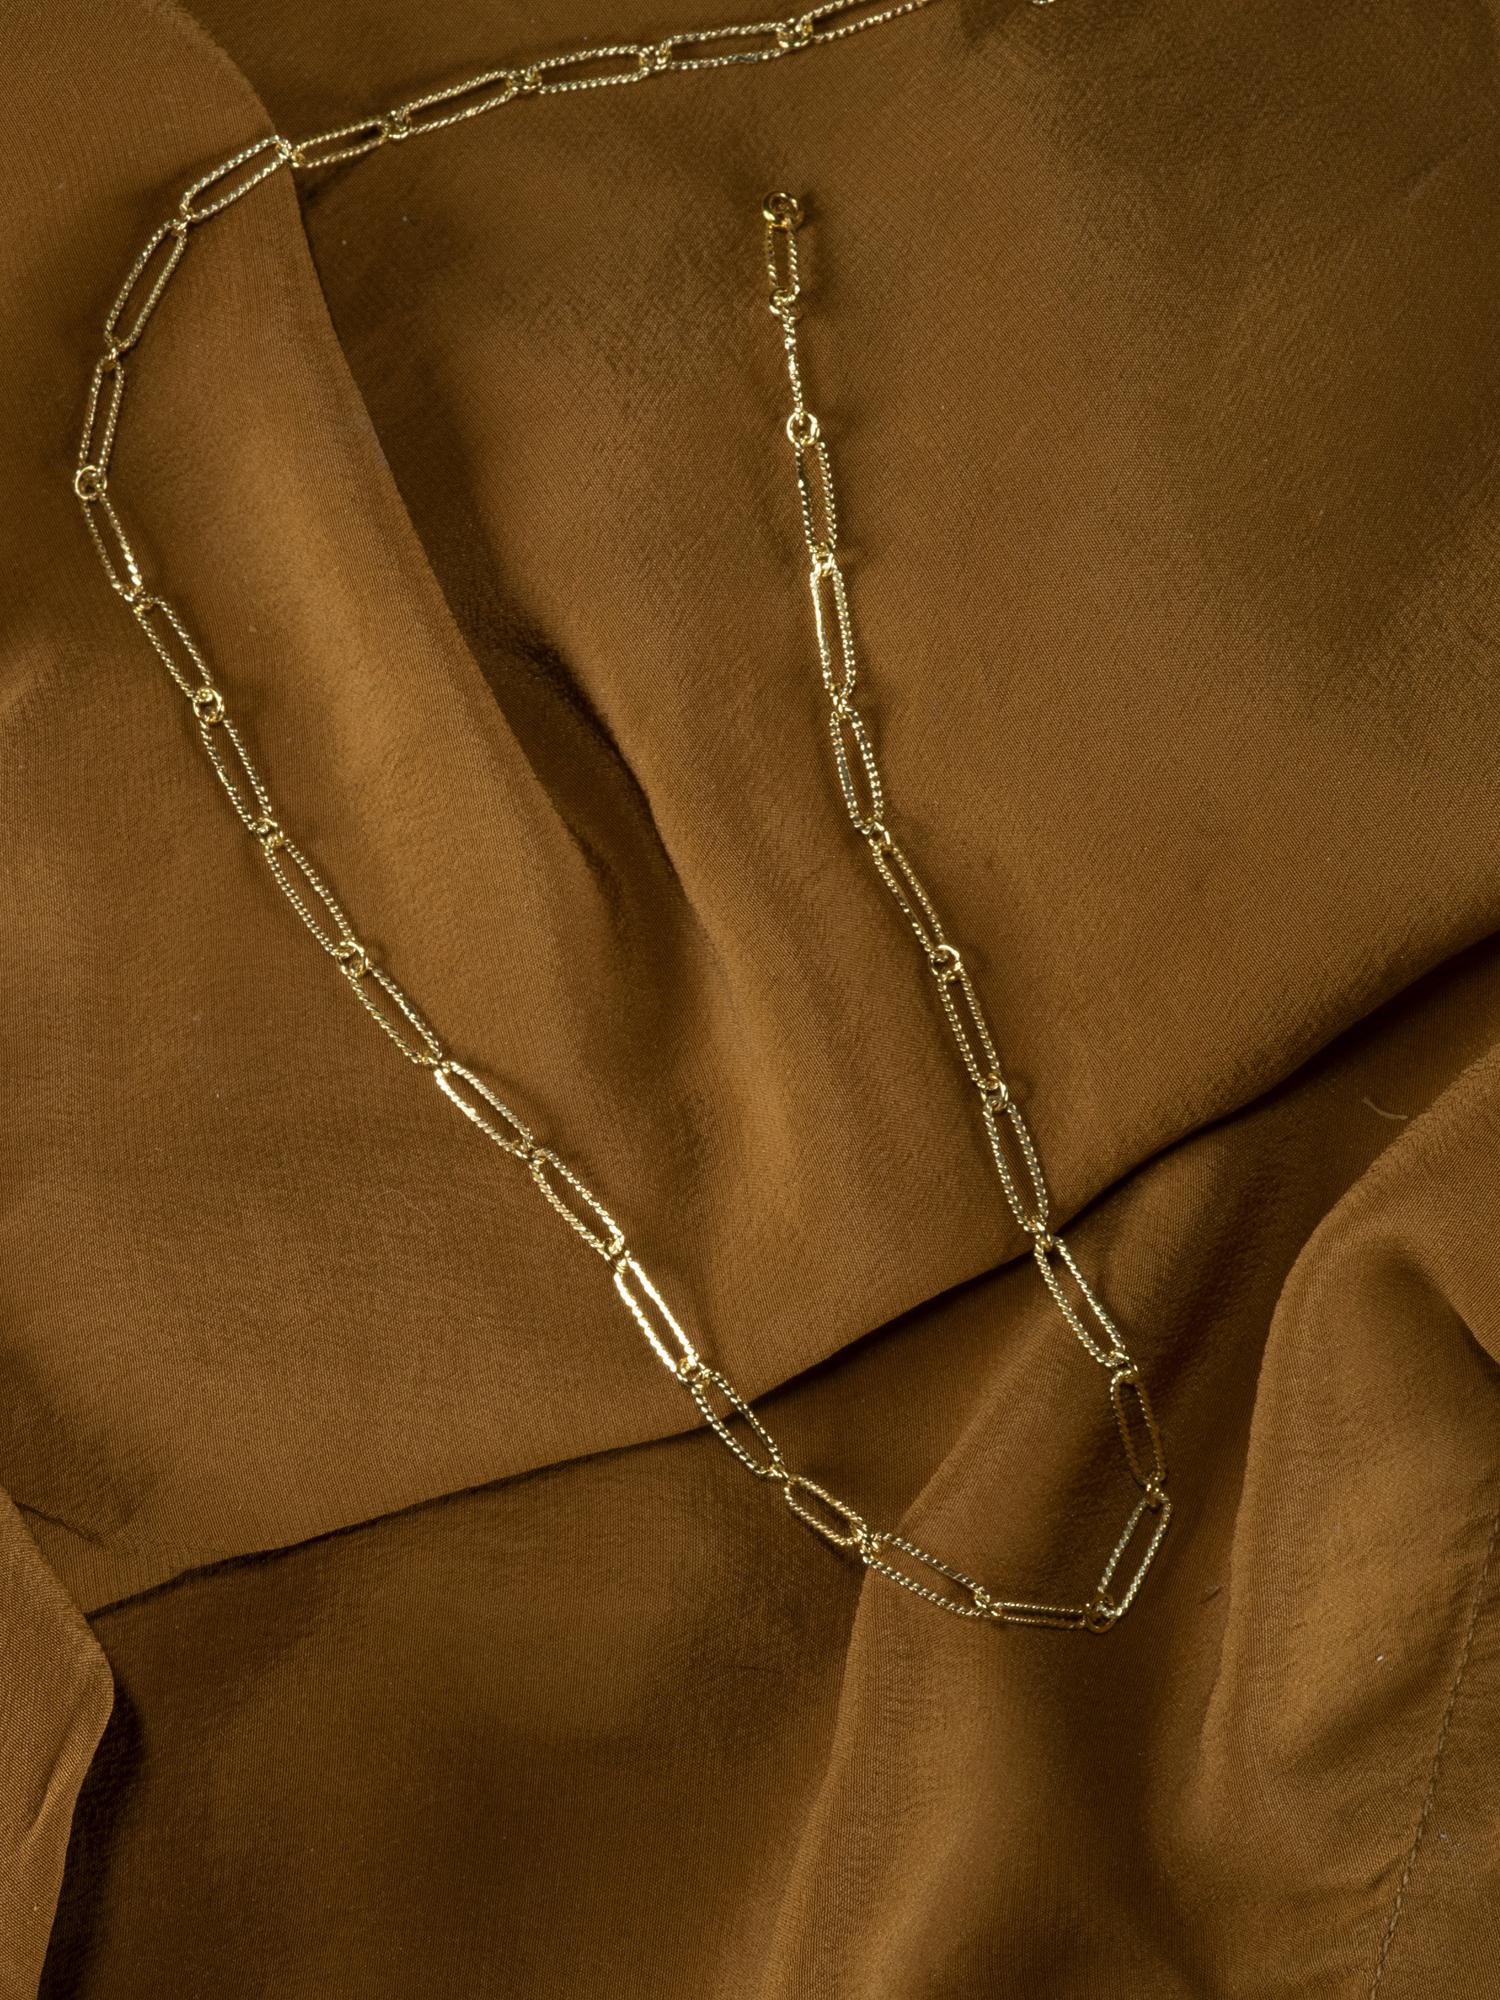 Part of our signature chain collection, the Olivia Necklace resembles the modern paperclip chain but with a twist. Literally. Crafted entirely by hand, our links are made in the traditional filigree method where gold wires are twisted together to